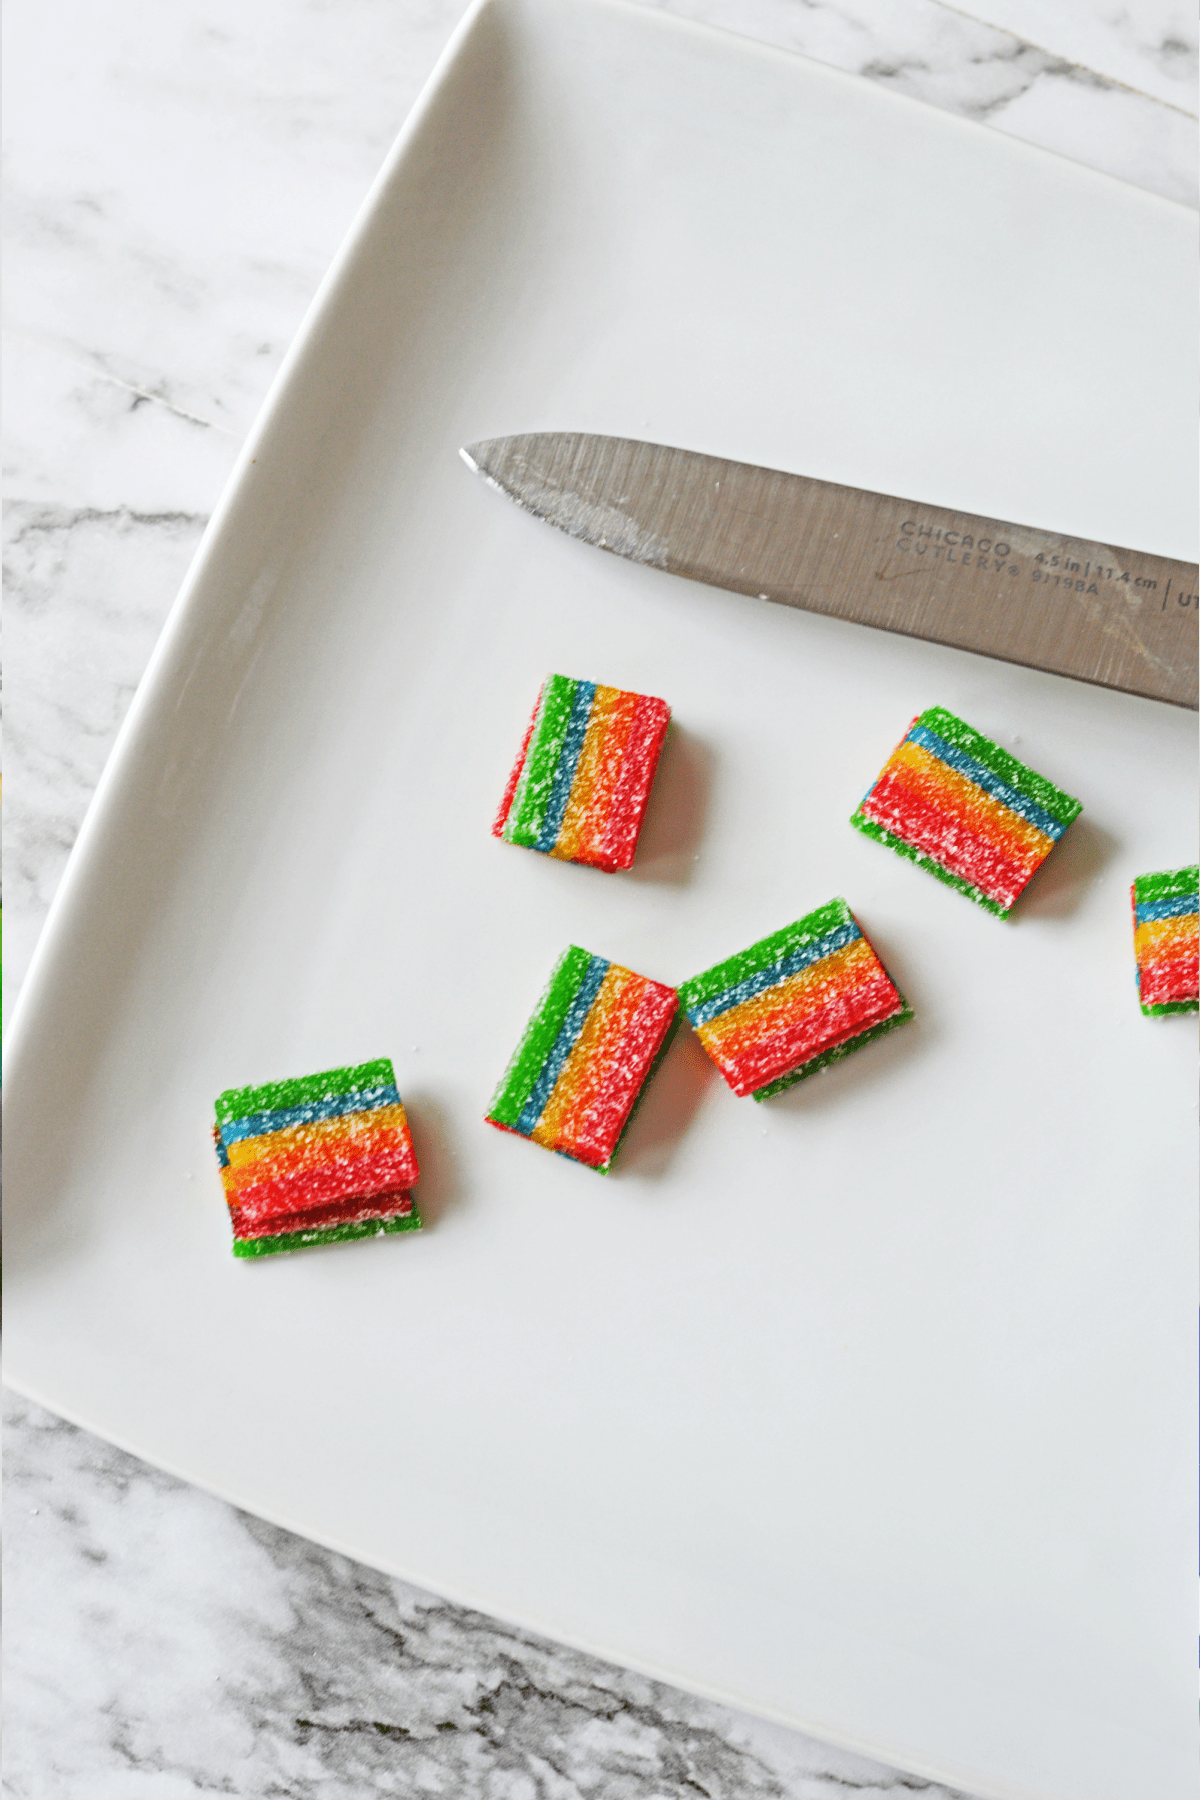 Rainbow candies cut into pieces